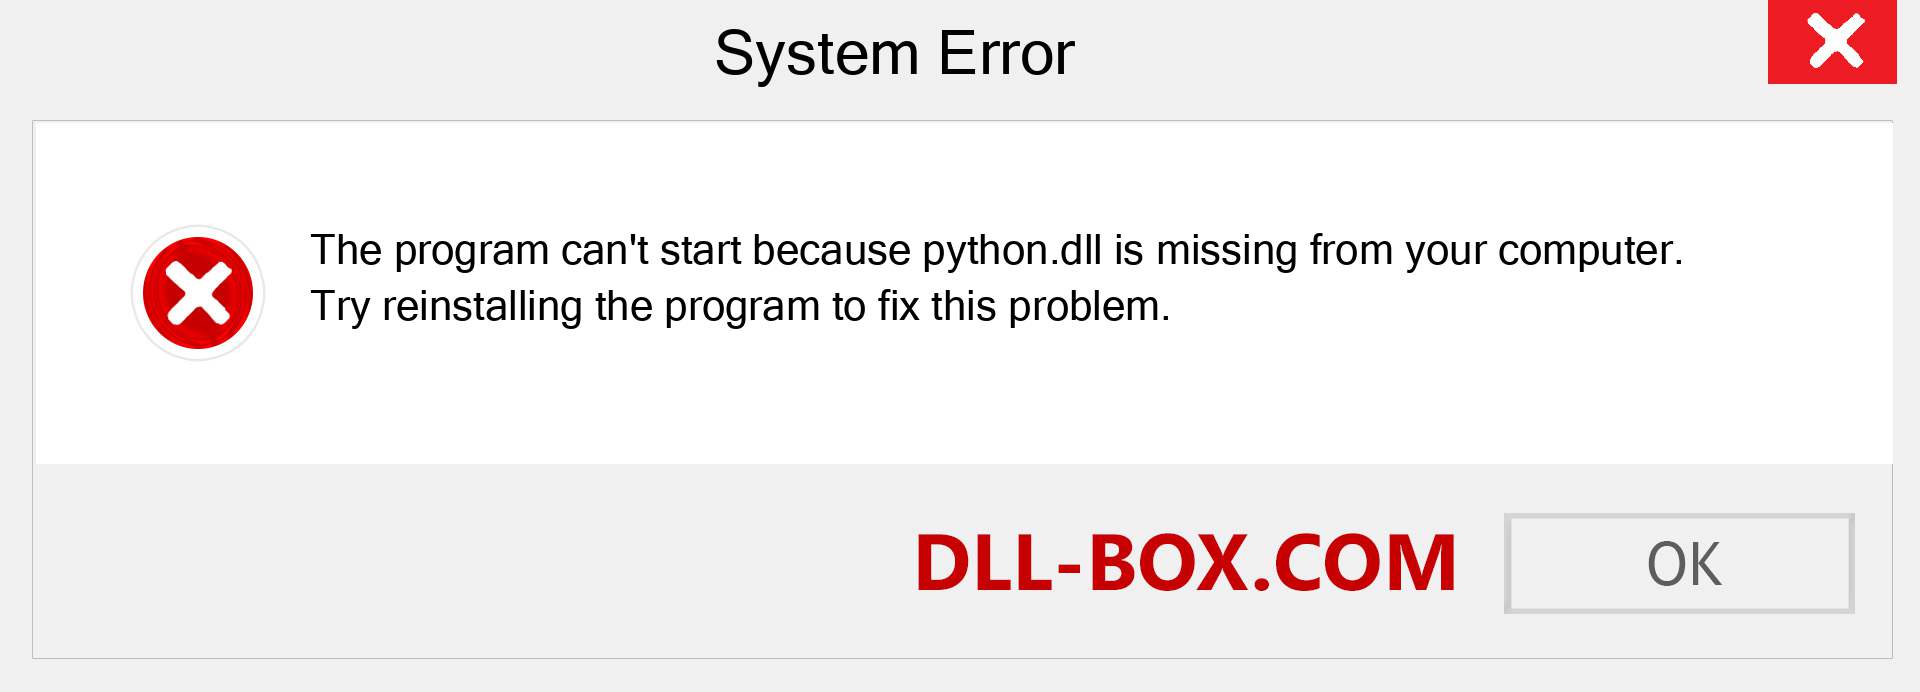  python.dll file is missing?. Download for Windows 7, 8, 10 - Fix  python dll Missing Error on Windows, photos, images